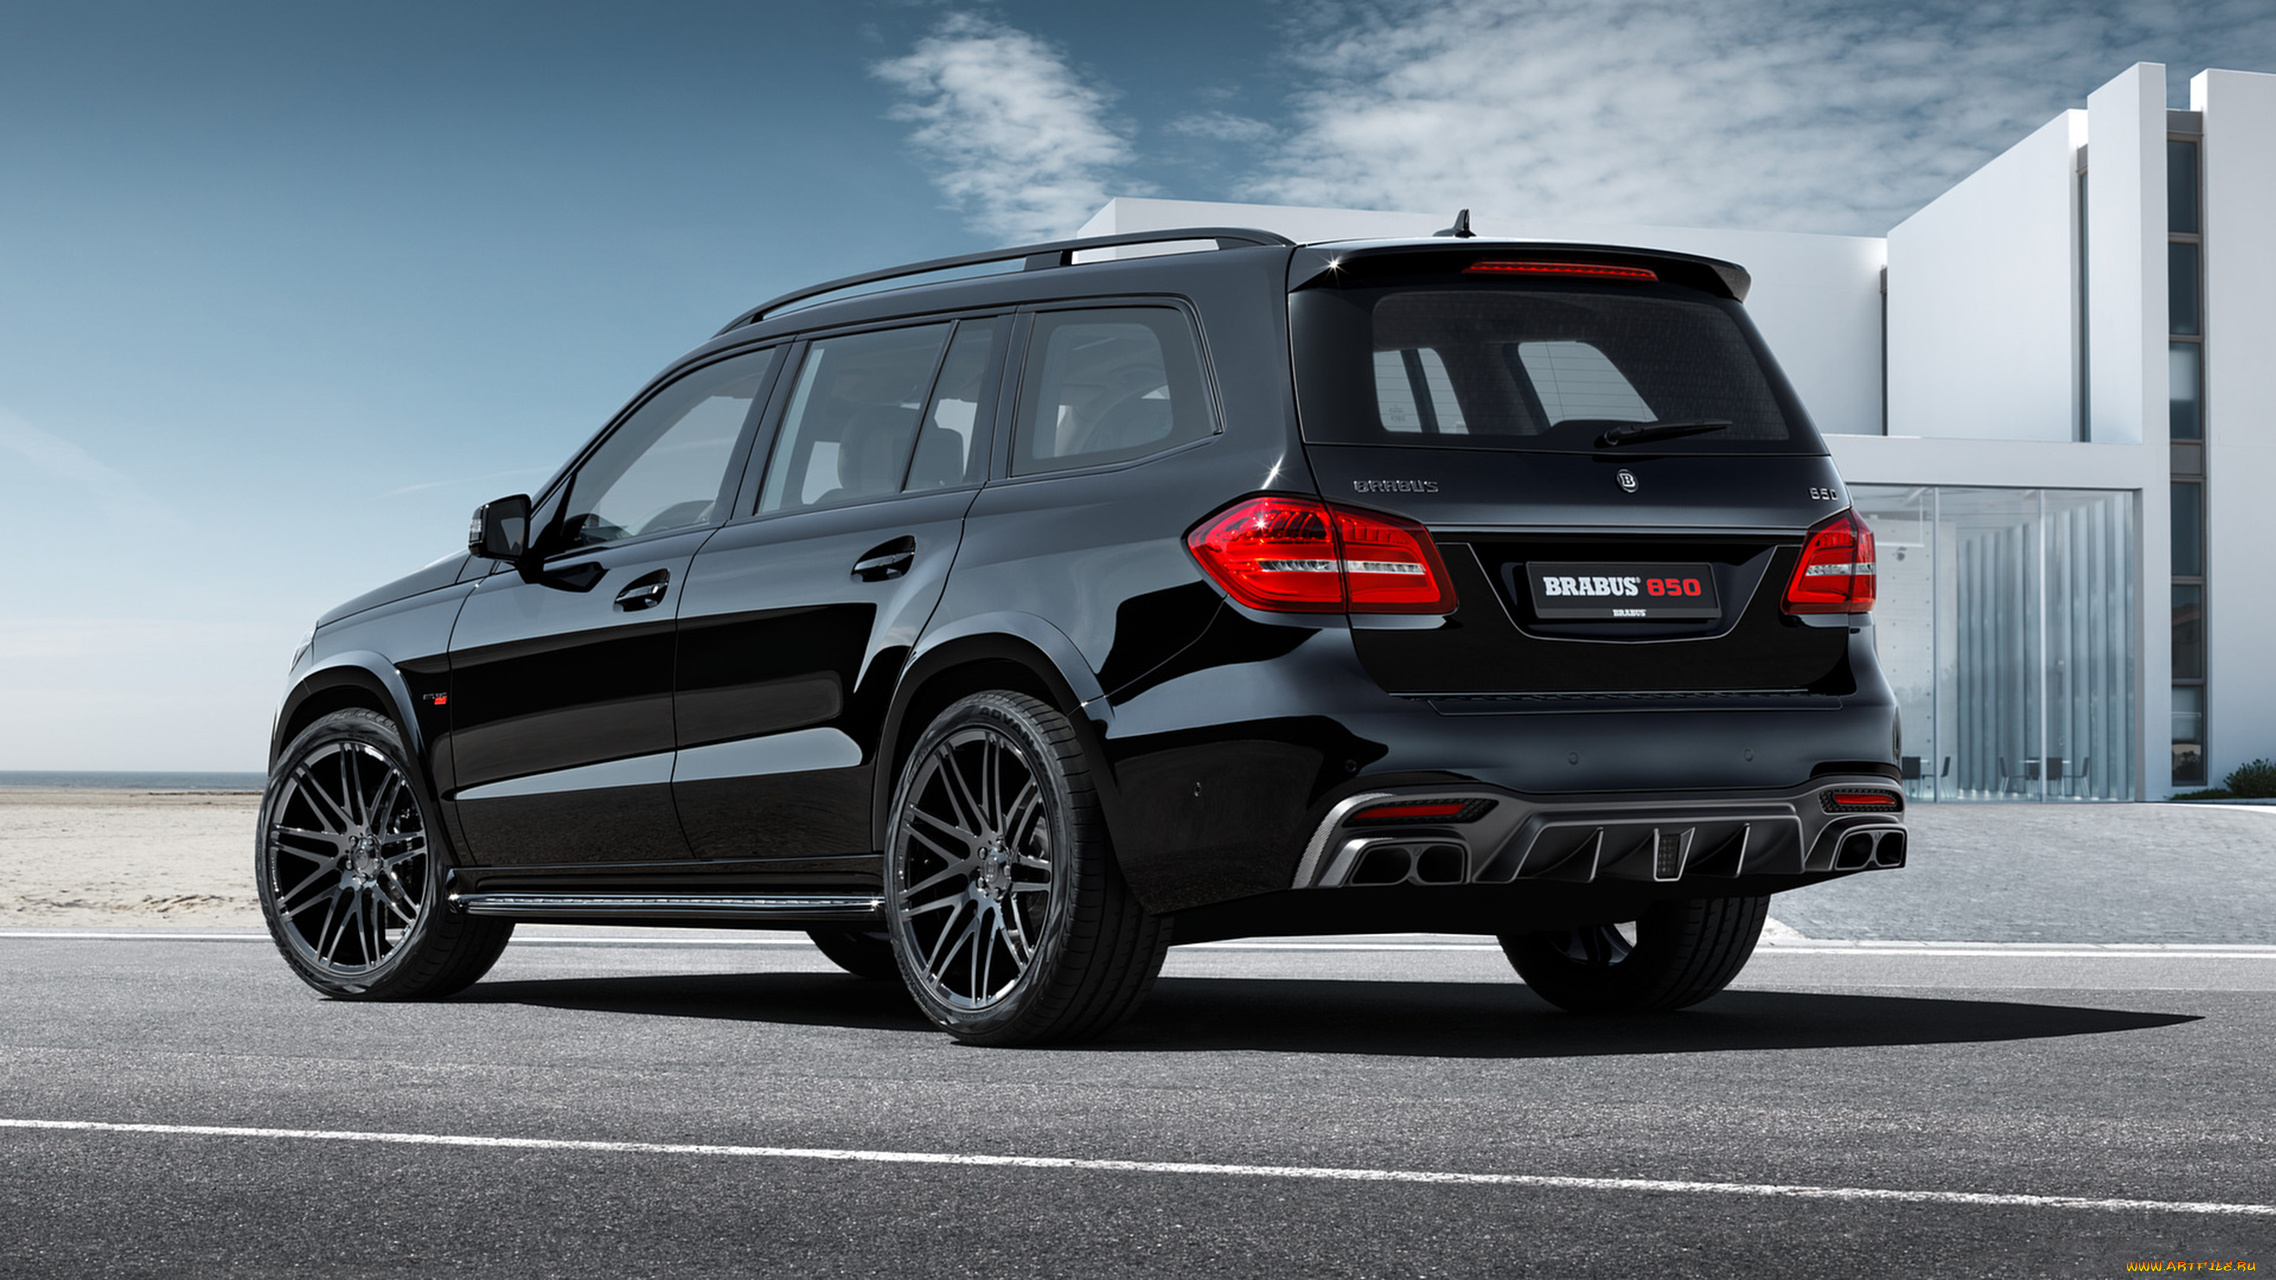 brabus, 850, xl, based, on, the, mercedes-benz, gls-63, 4matic, 2017, автомобили, brabus, 2017, 4matic, gls-63, mercedes-benz, based, xl, 850